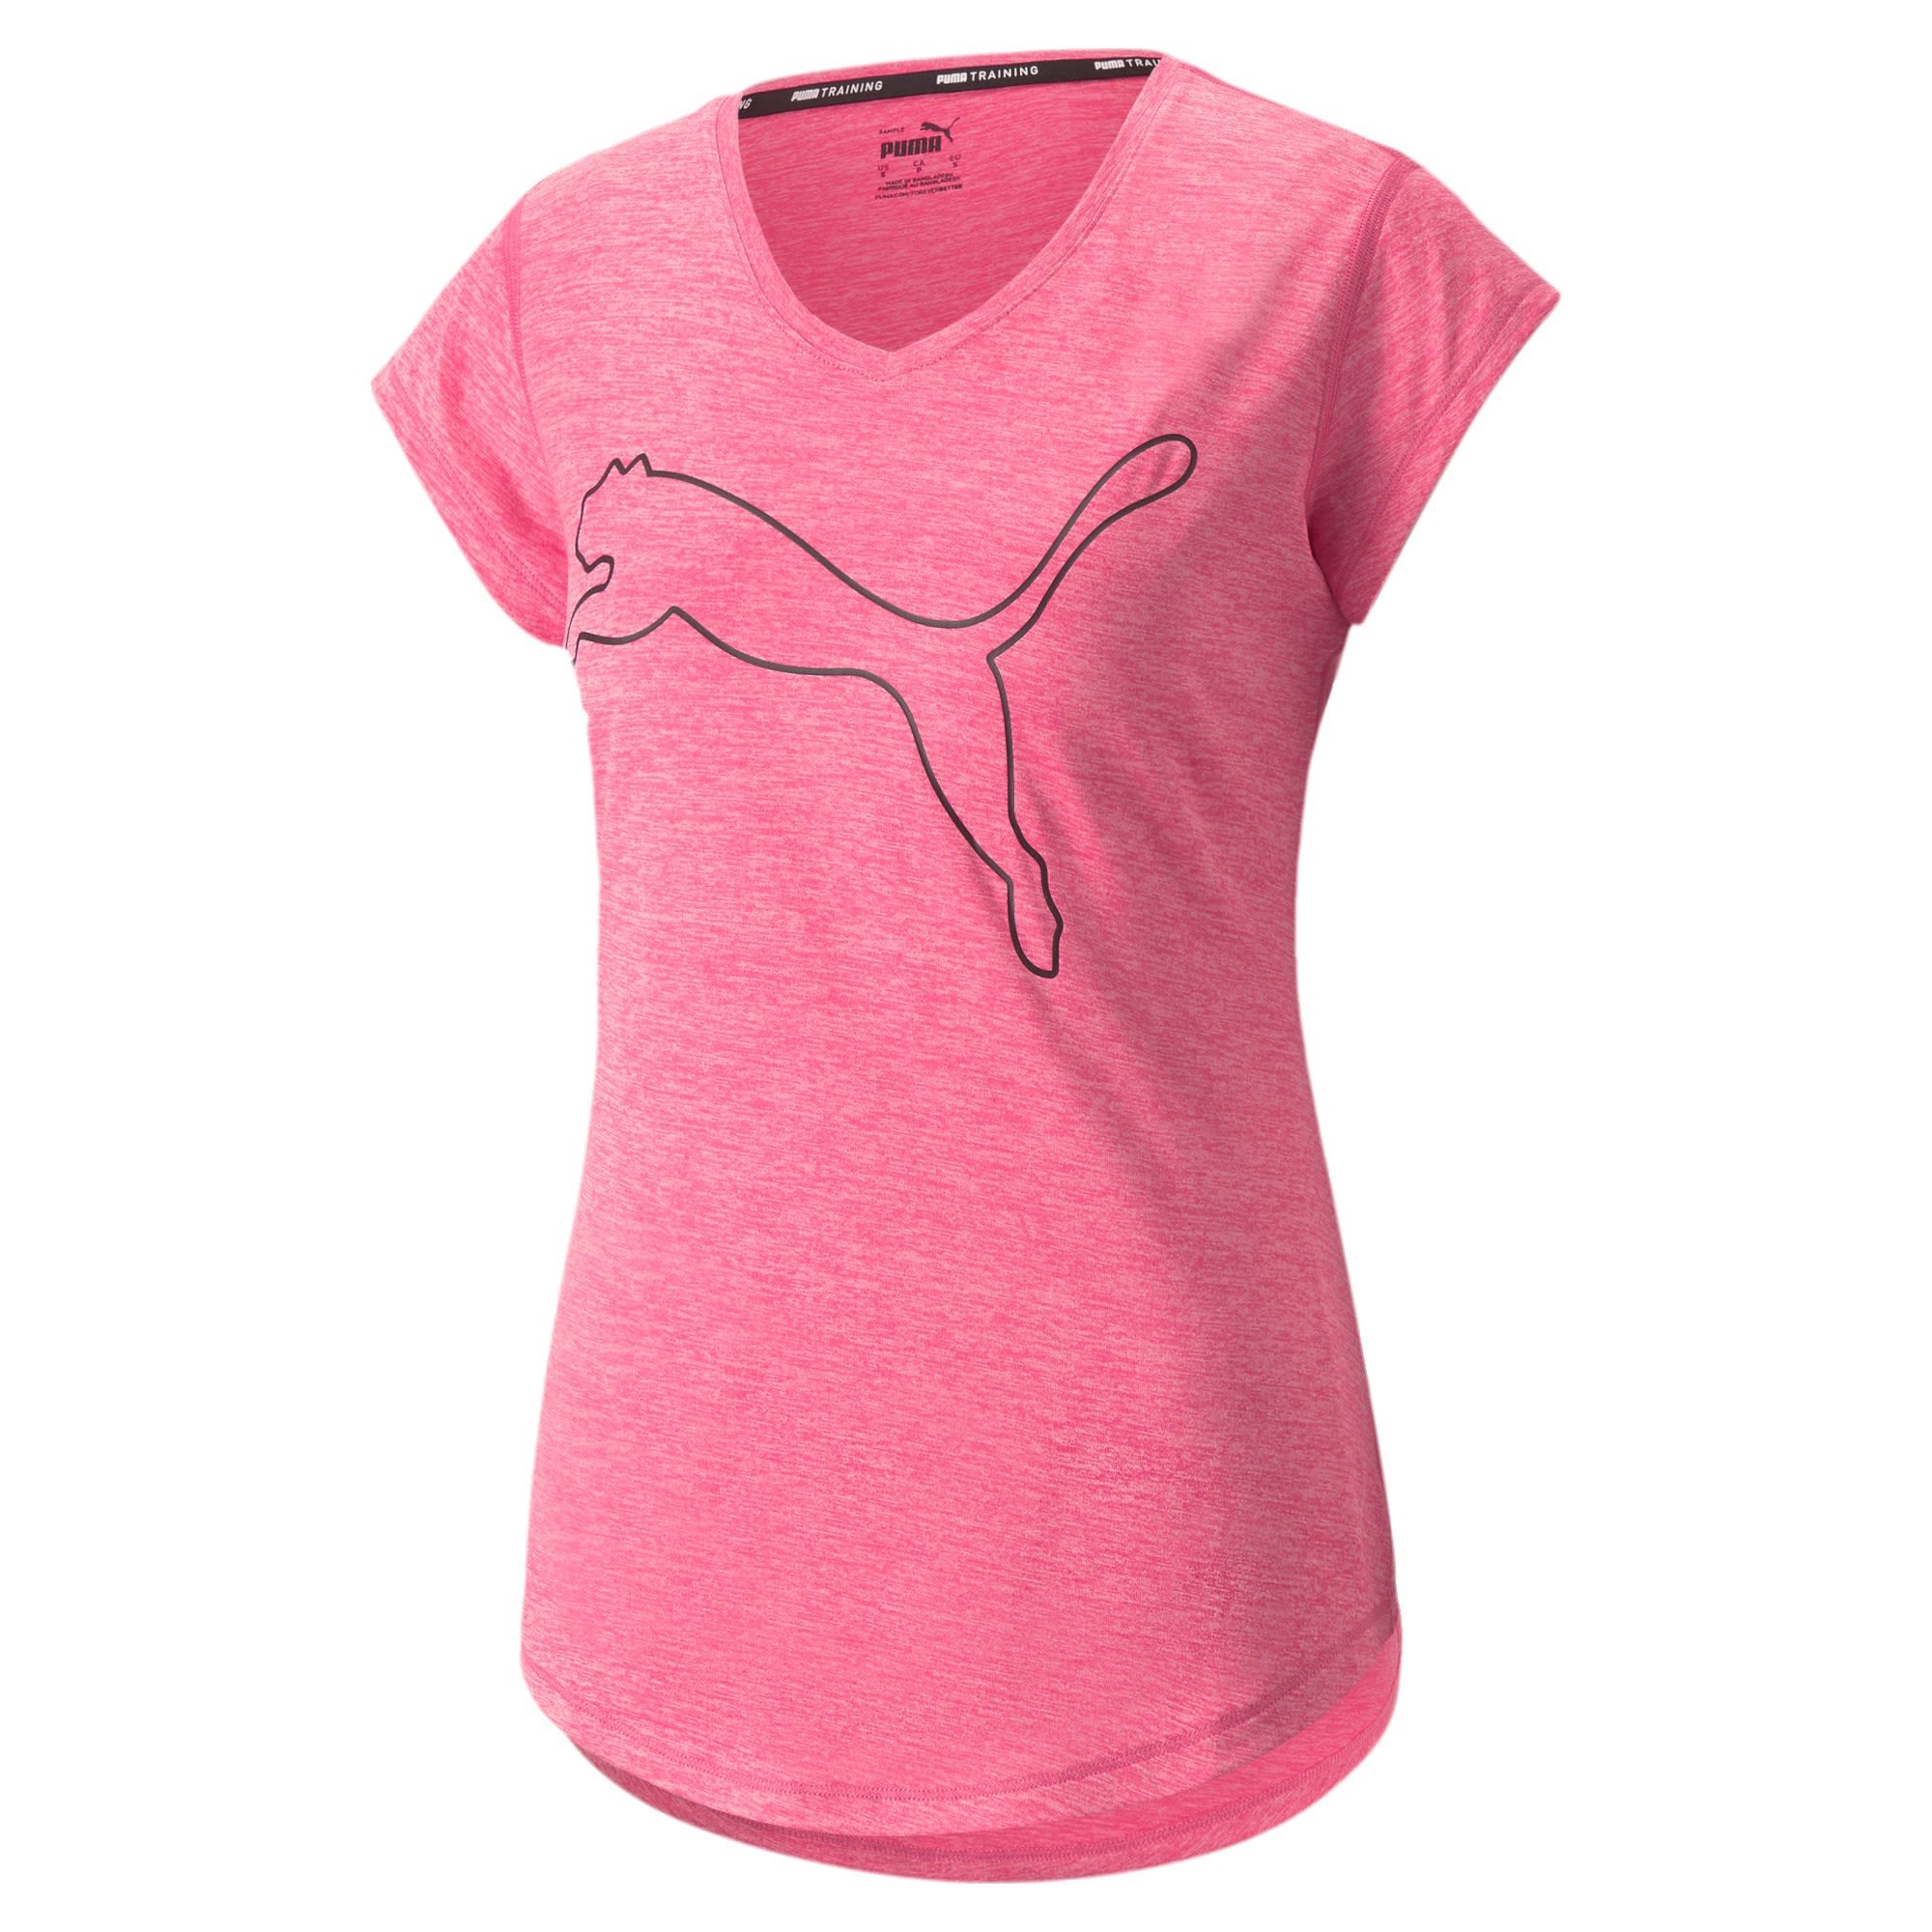 Puma Train Favorite Heather CAT Tee Pink- Female Kurzarm-Shirts- Grsse XS - Farbe Sunset Pink Heather - Outline Cat